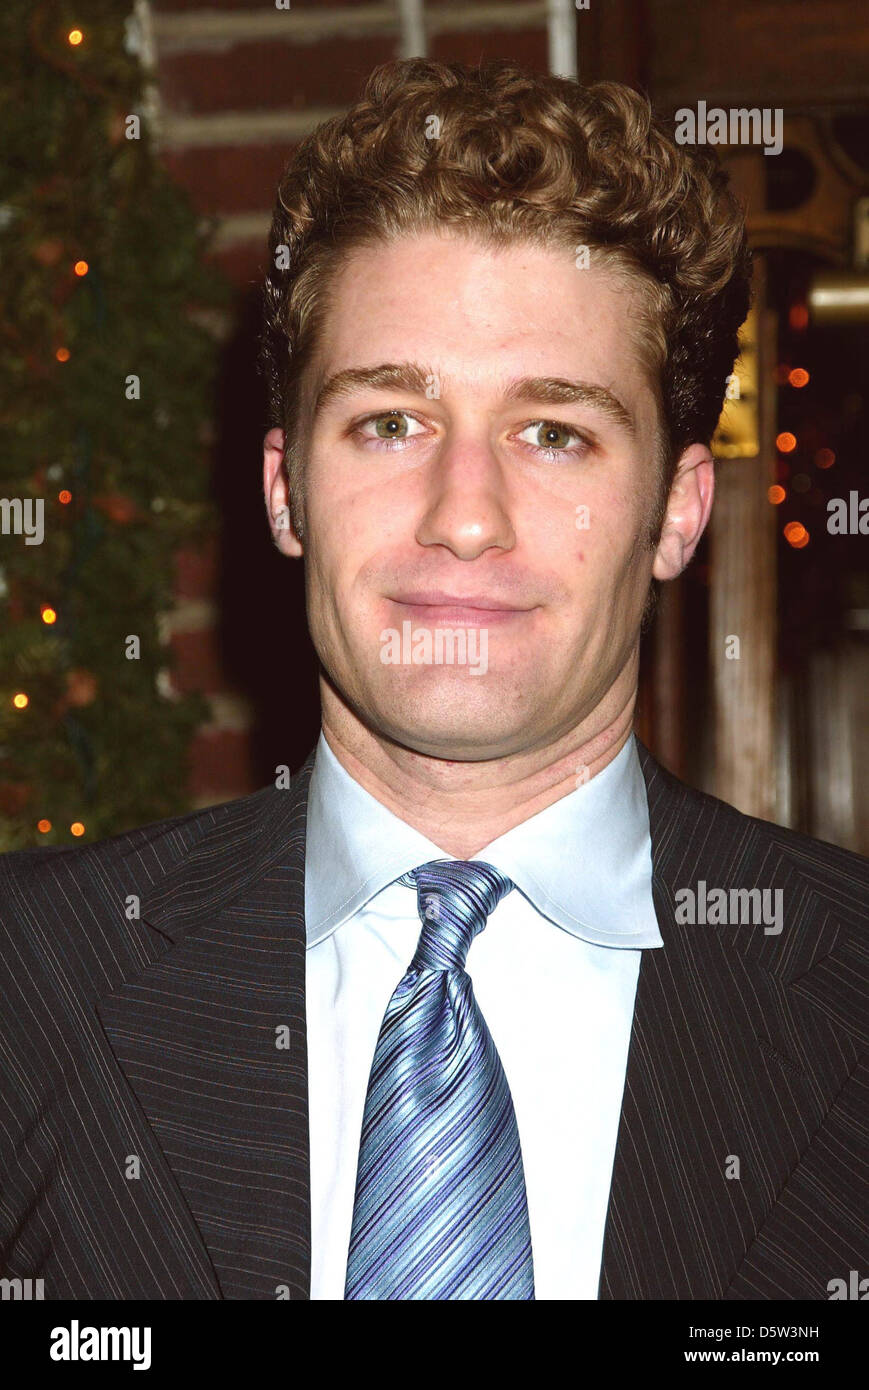 Matthew Morrison from the TV show 'Glee' Opening night after party for  'Henry IV' held at Tavern On the Green restaurant. New Stock Photo - Alamy